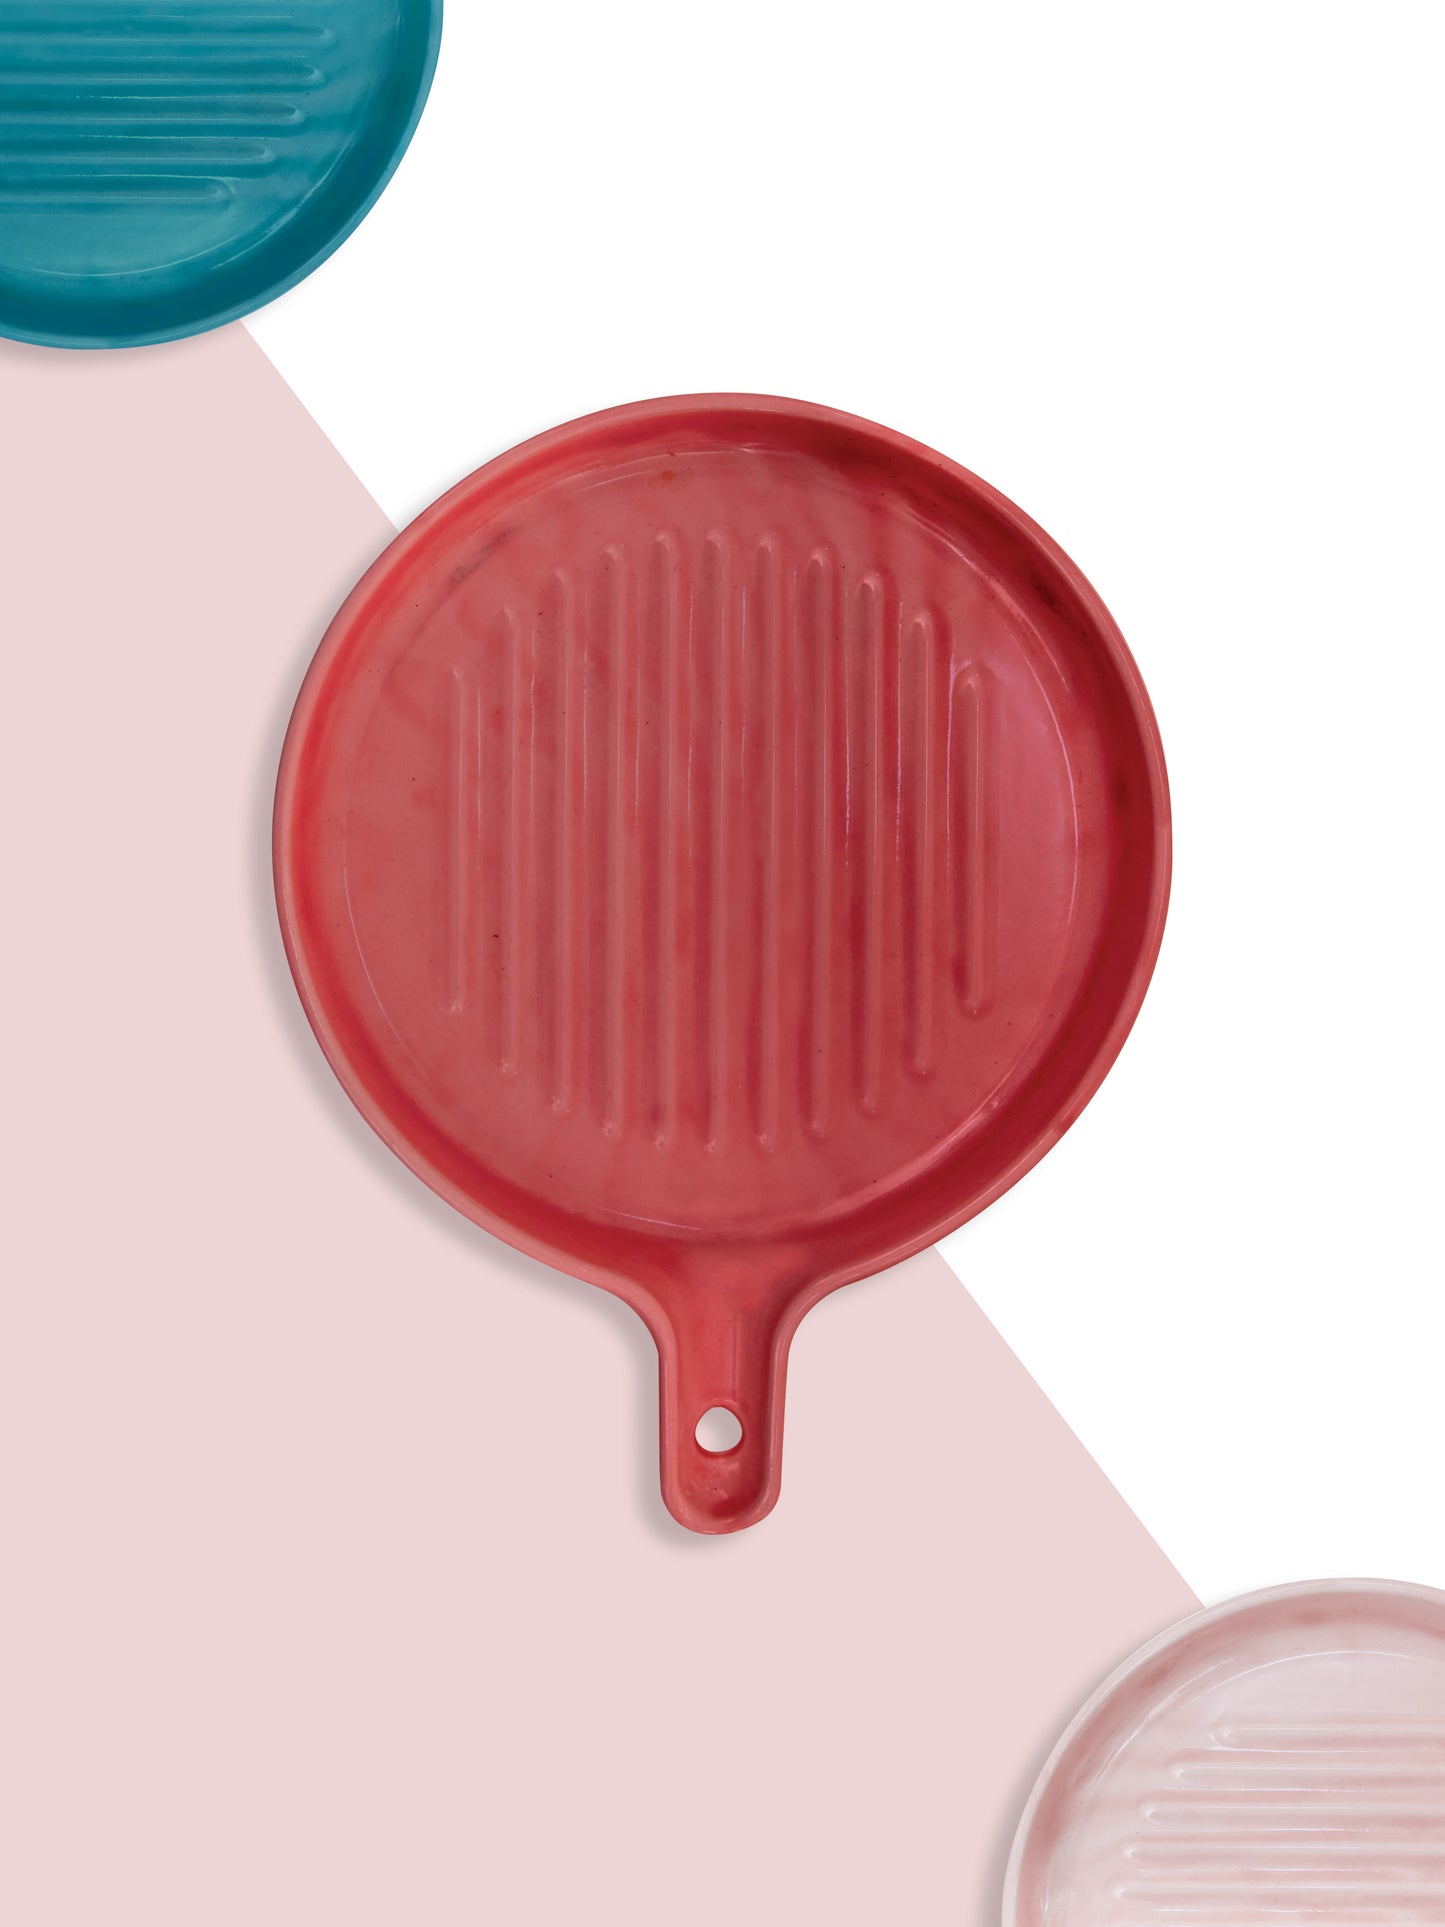 Ceramic Round Grill Plates for Serving, Red